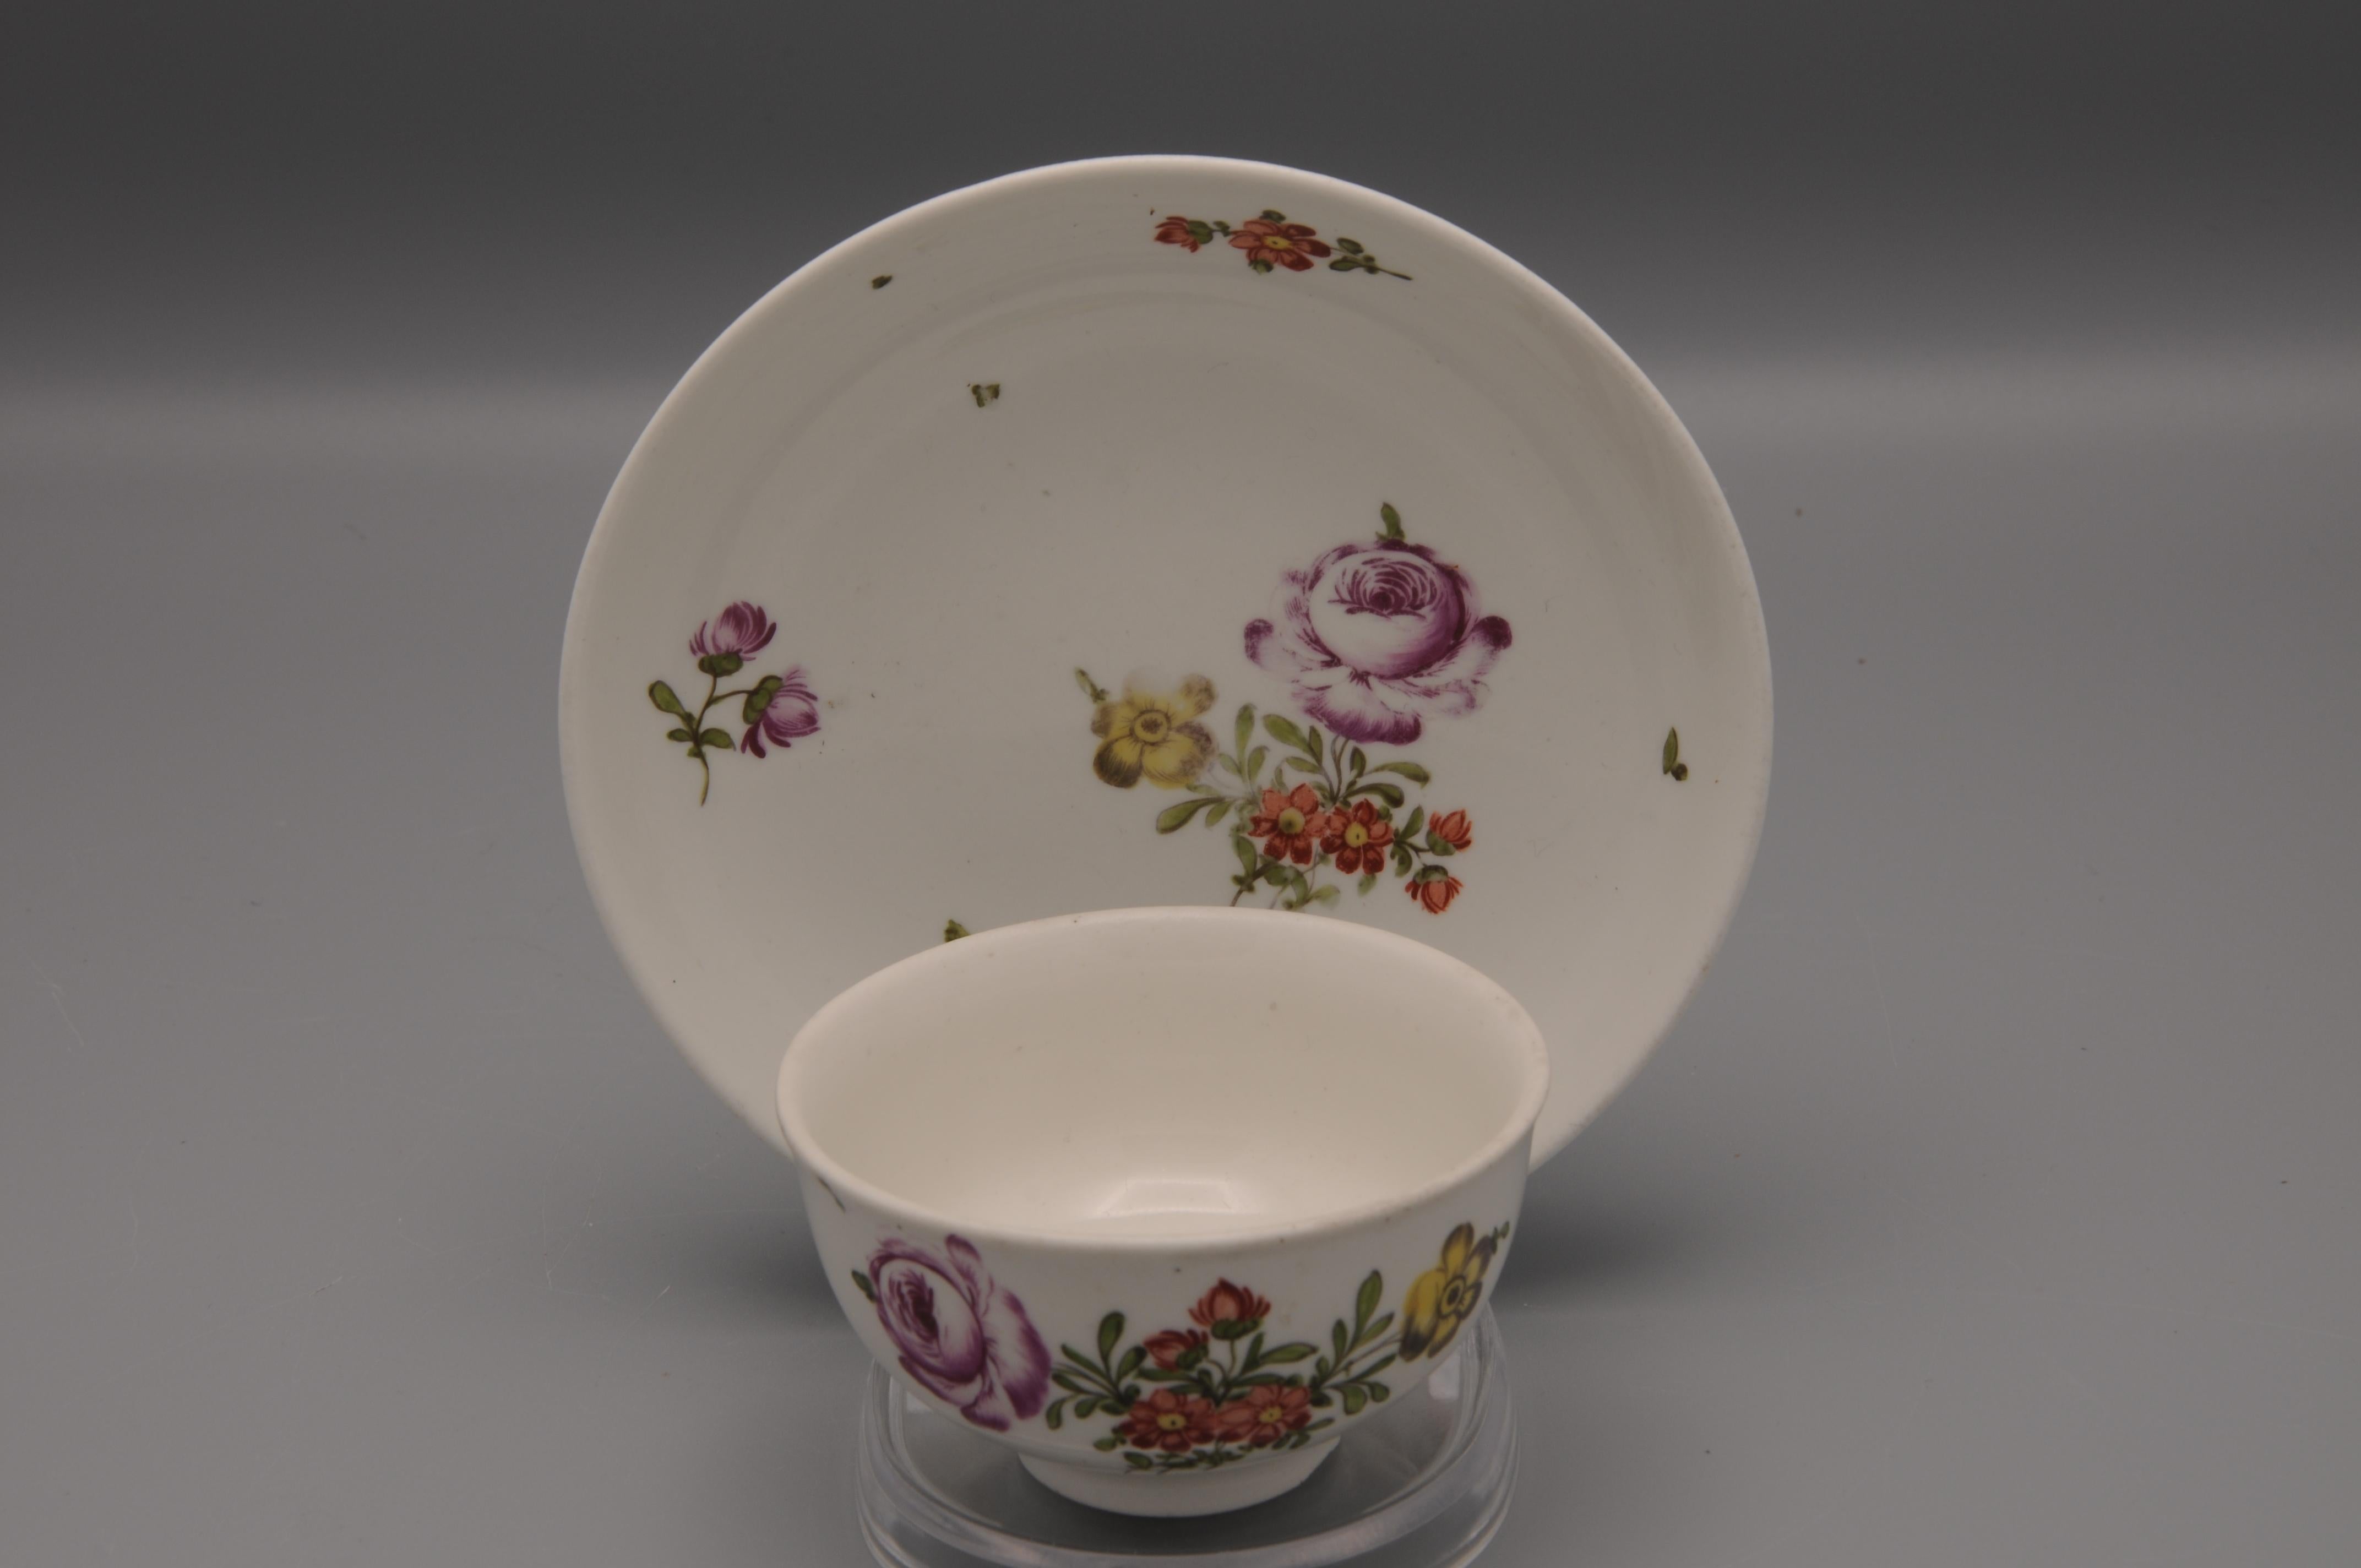 Vienna Porcelain Coffee or Mokka Cup and Saucer with floral decoration.

Product of the Vienna Porcelain Manufactory (German: Kaiserlich privilegierte Porcellain Fabrique), a porcelain manufacturer in Alsergrund in Vienna, Austria. It was founded in